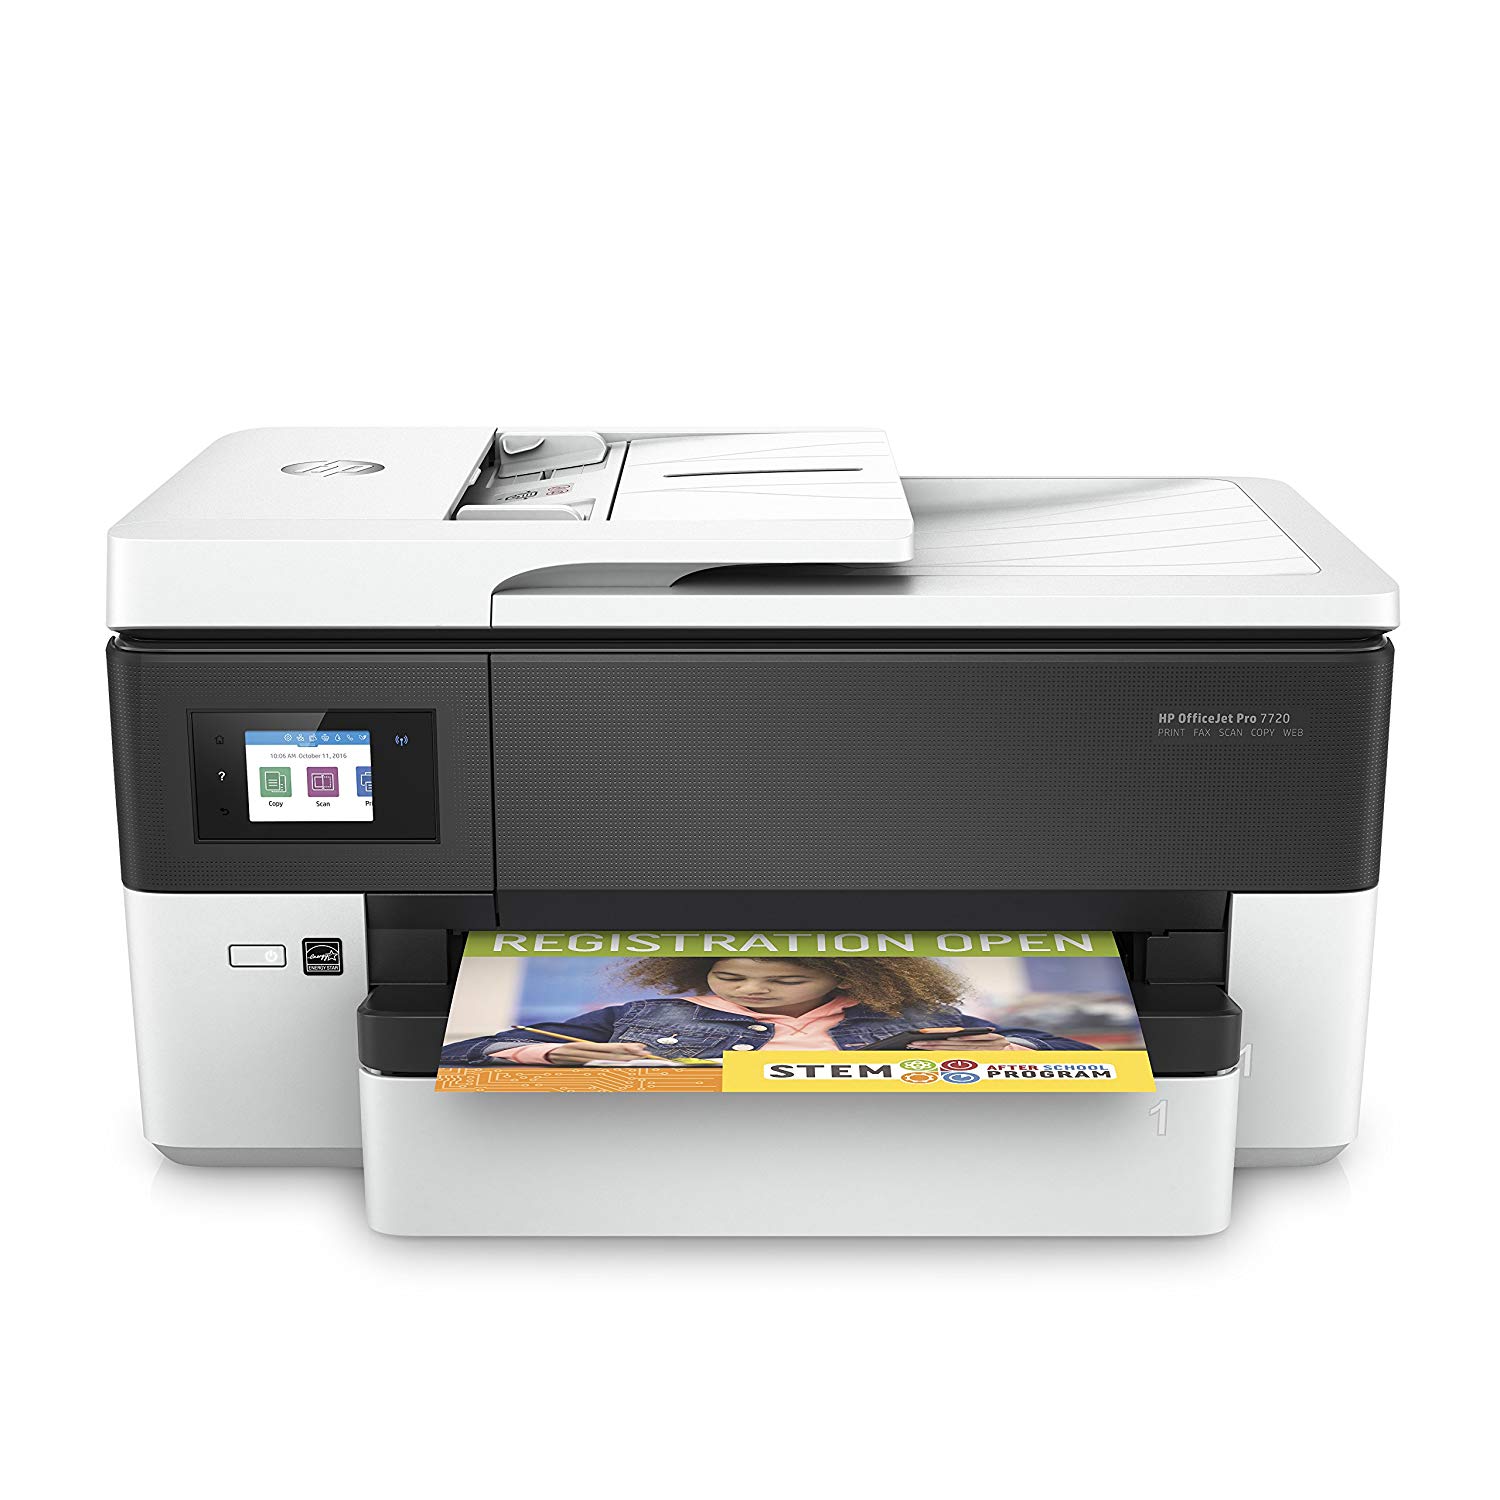 HP OfficeJet Pro 7720 Driver Downloads | Download Drivers ...